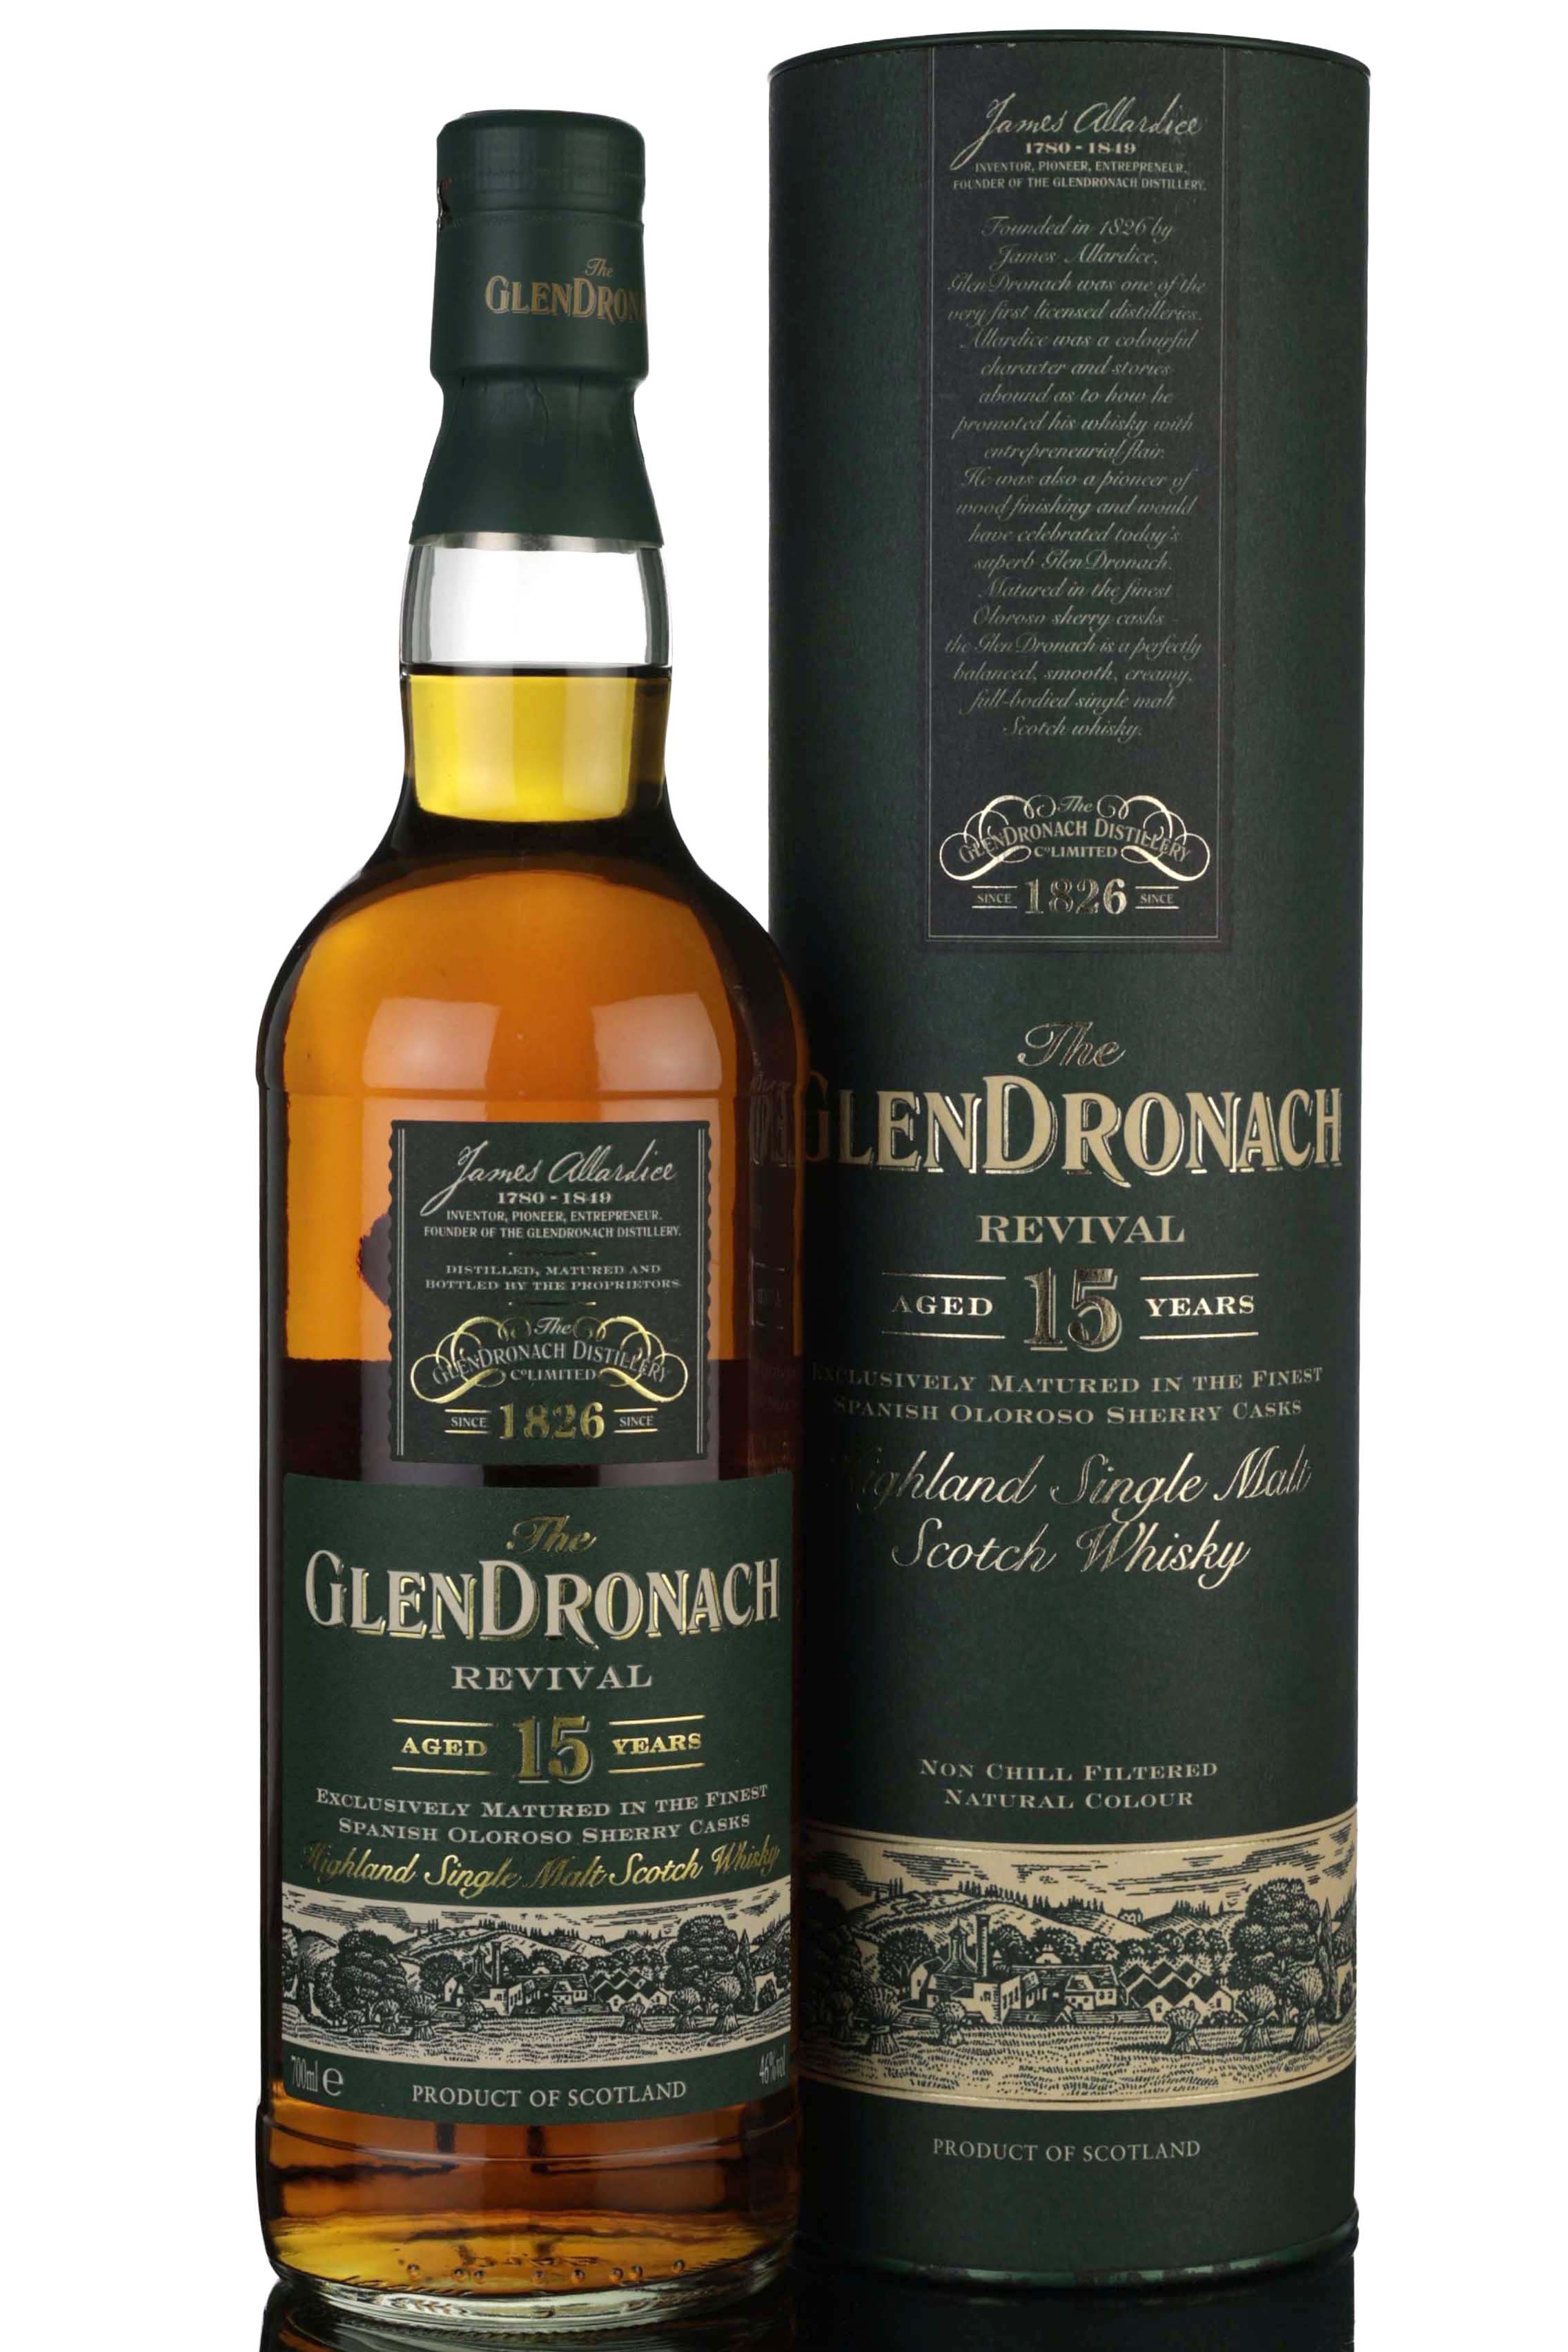 Glendronach 15 Year Old - Revival - 2010 Release